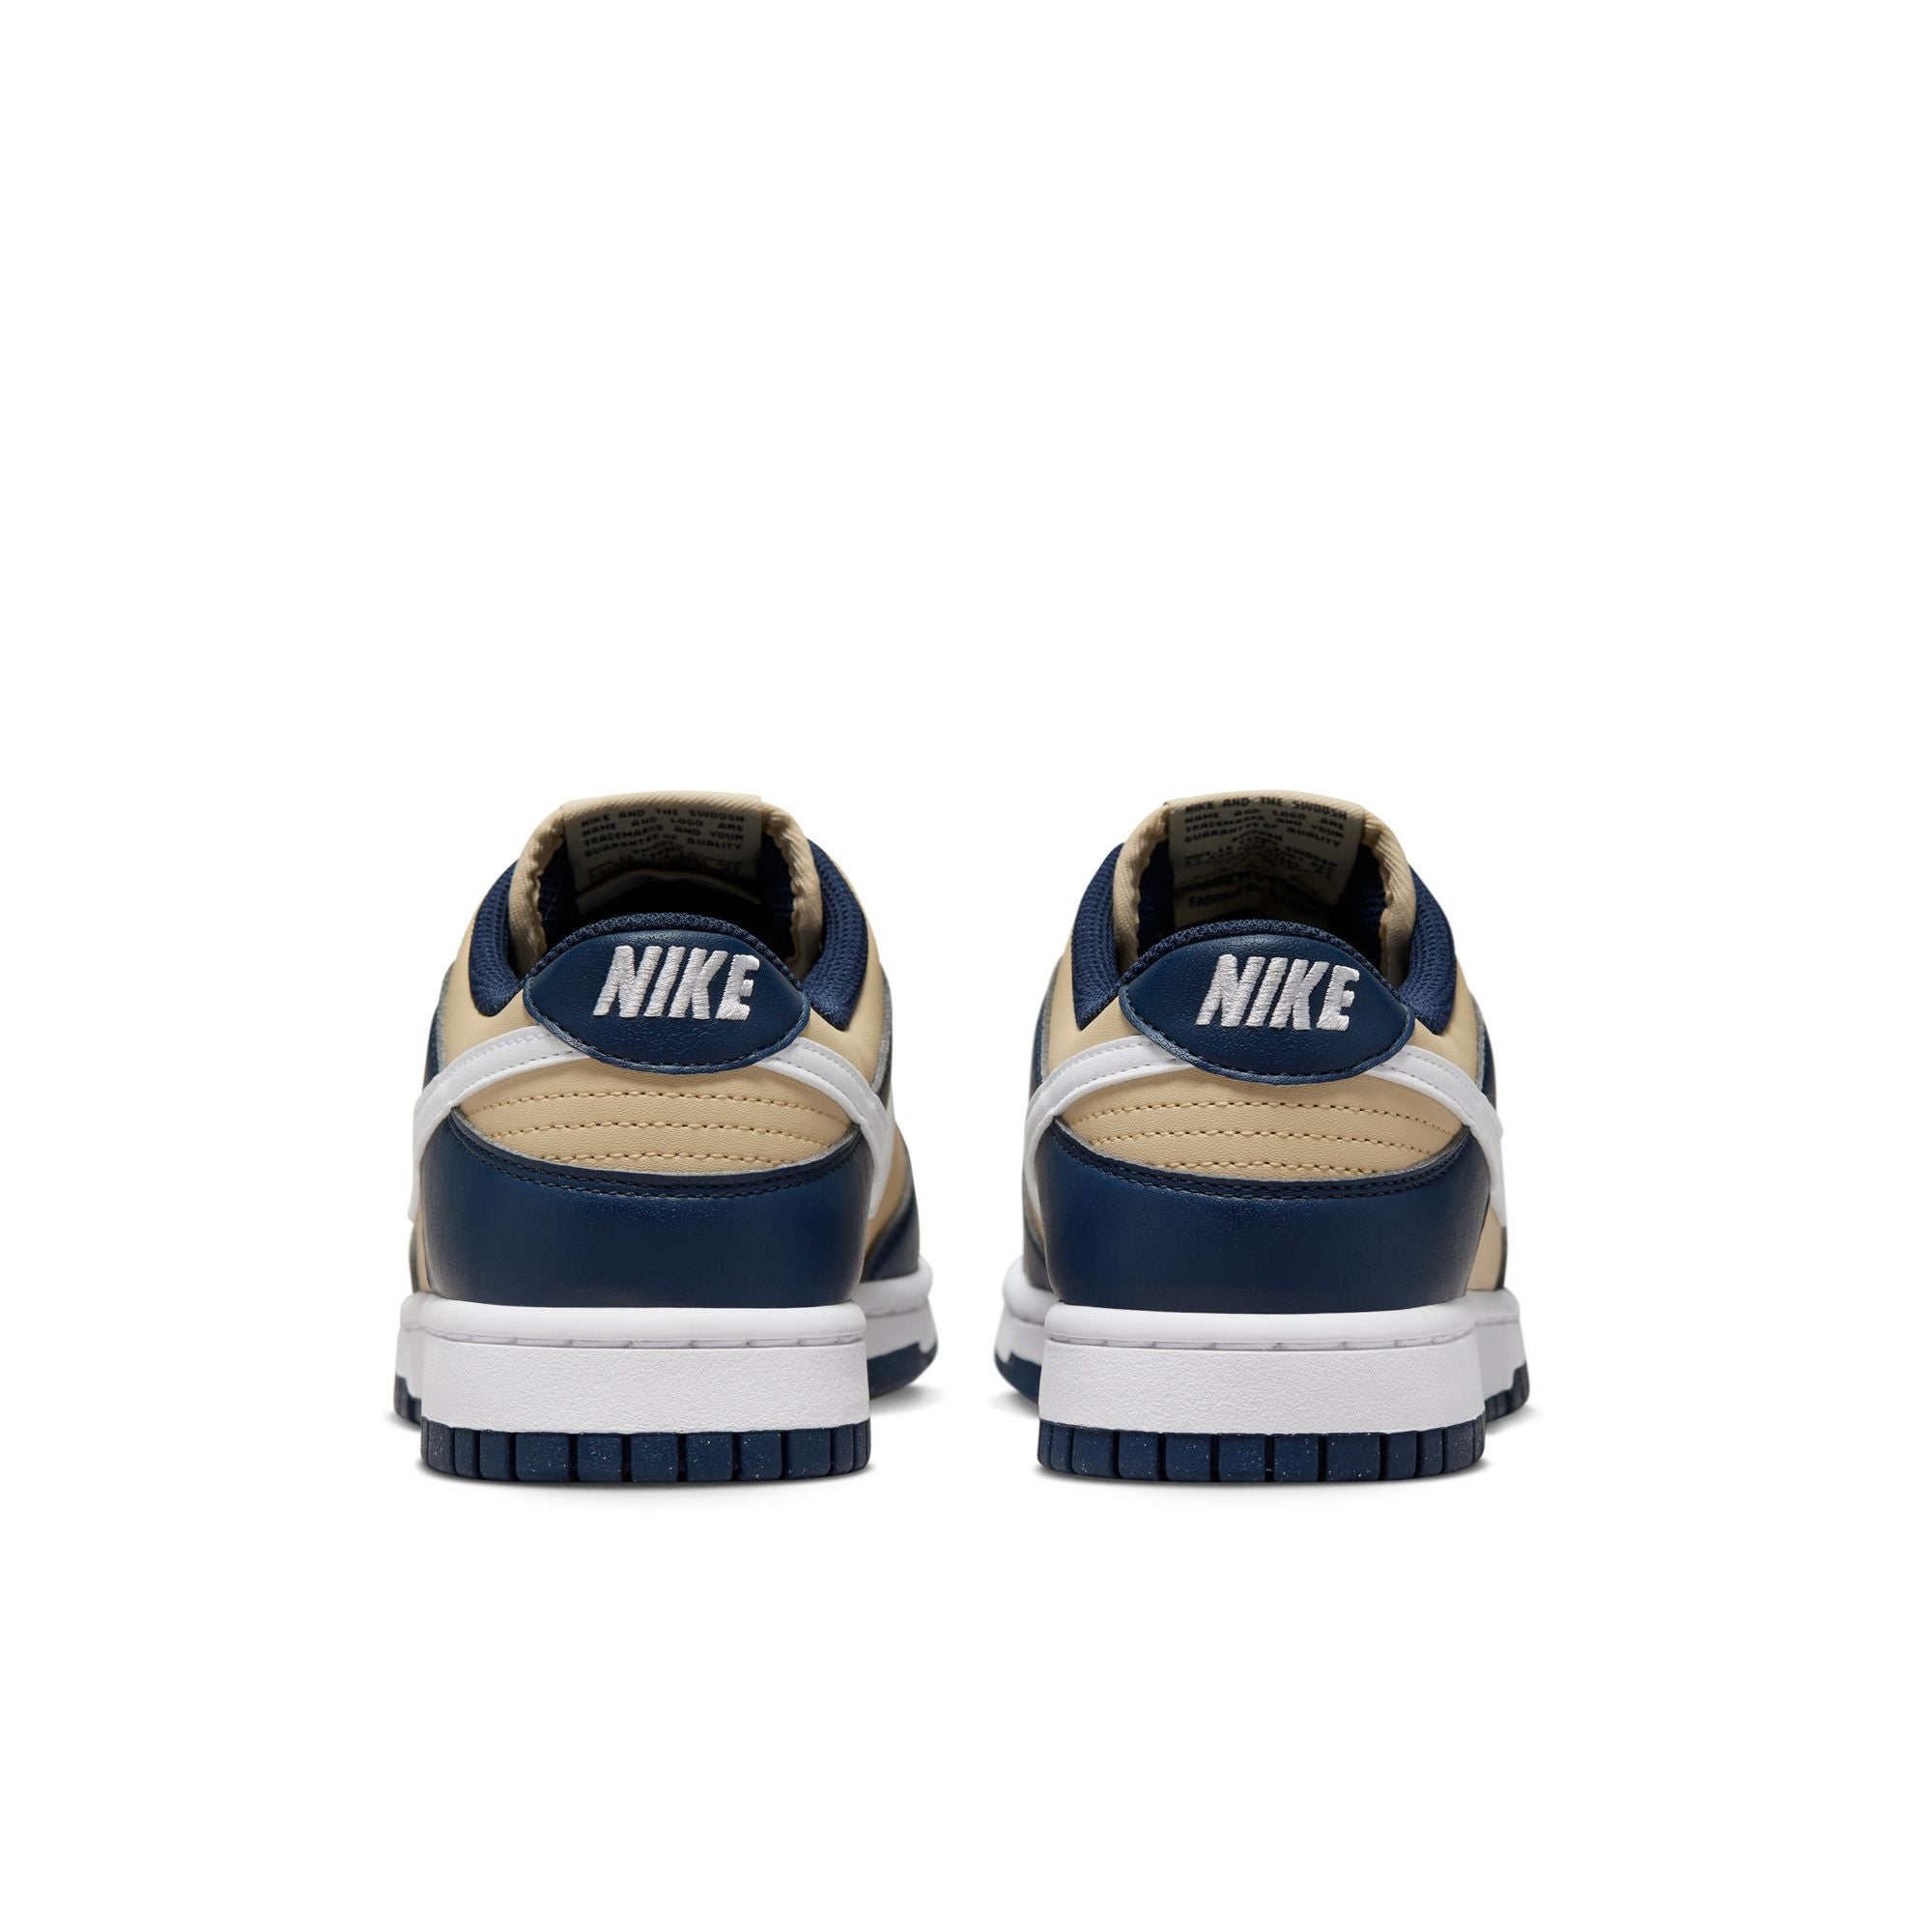 Women's Nike Dunk Low Panda Colorway - Civilized Nation - Official Site